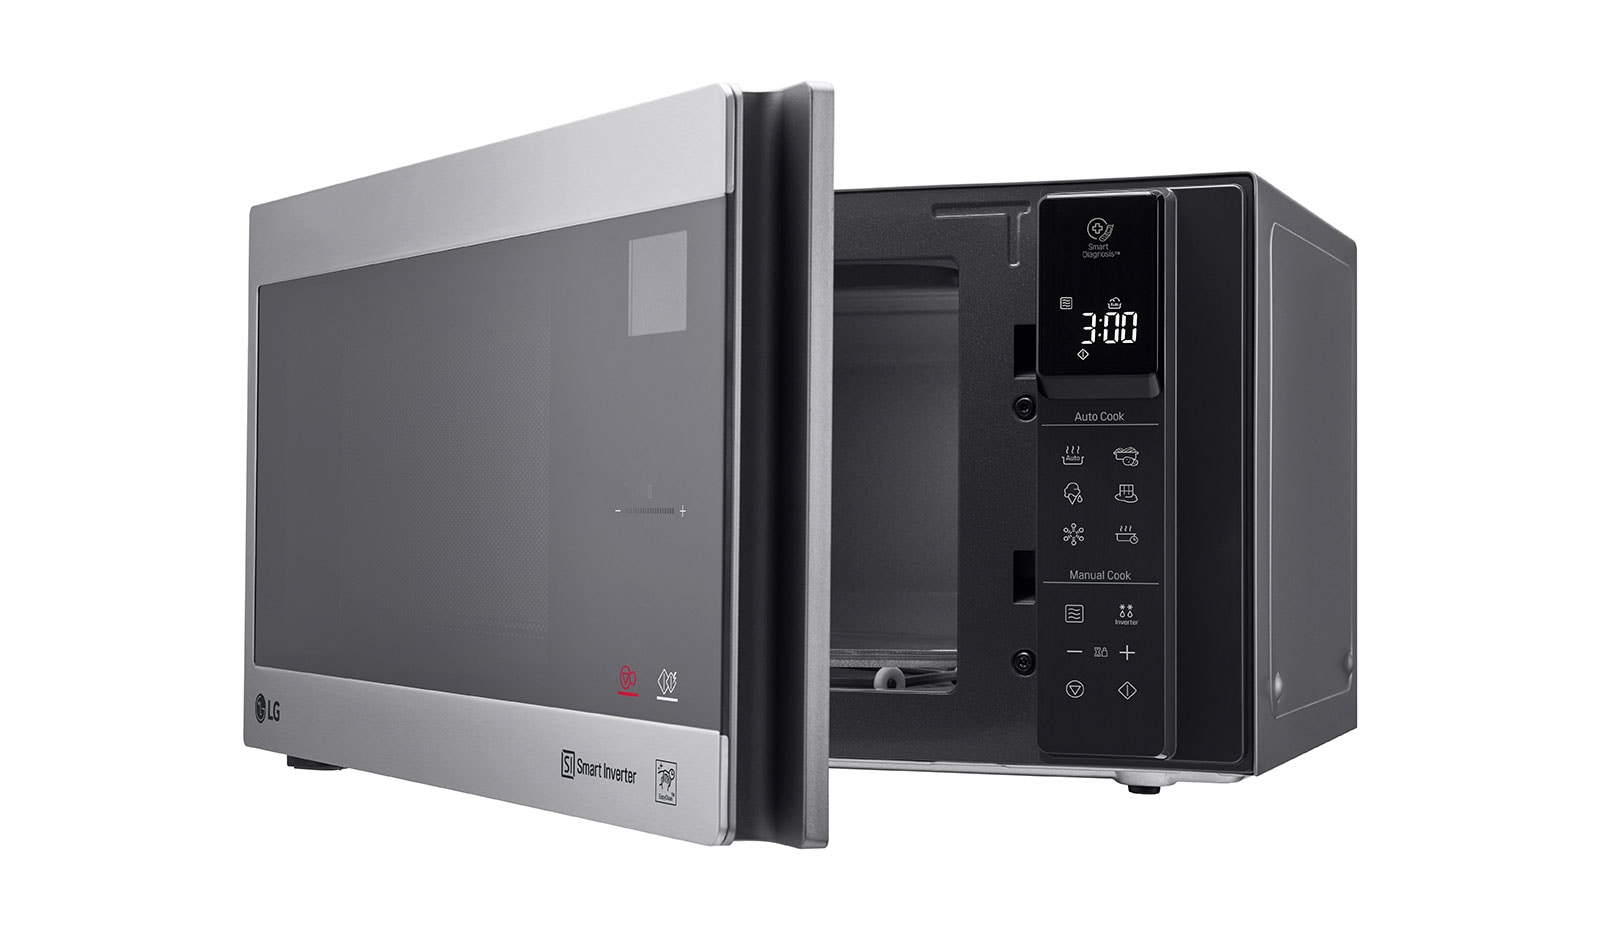 LG NeoChef 42 Liter Microwave Oven from LG - Silver